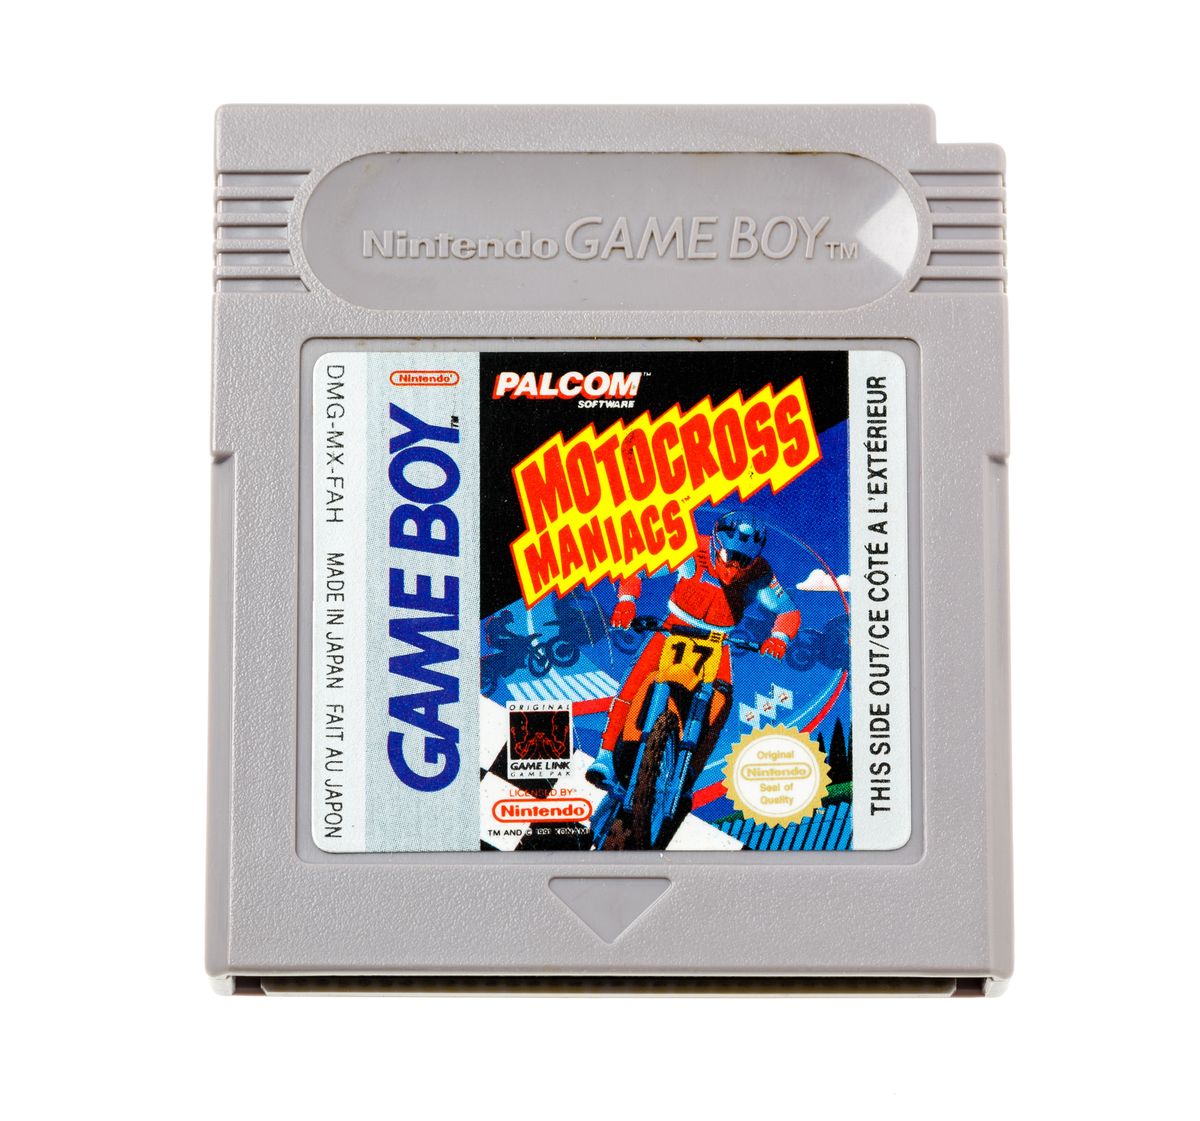 Motocross Maniacs - Gameboy Classic Games